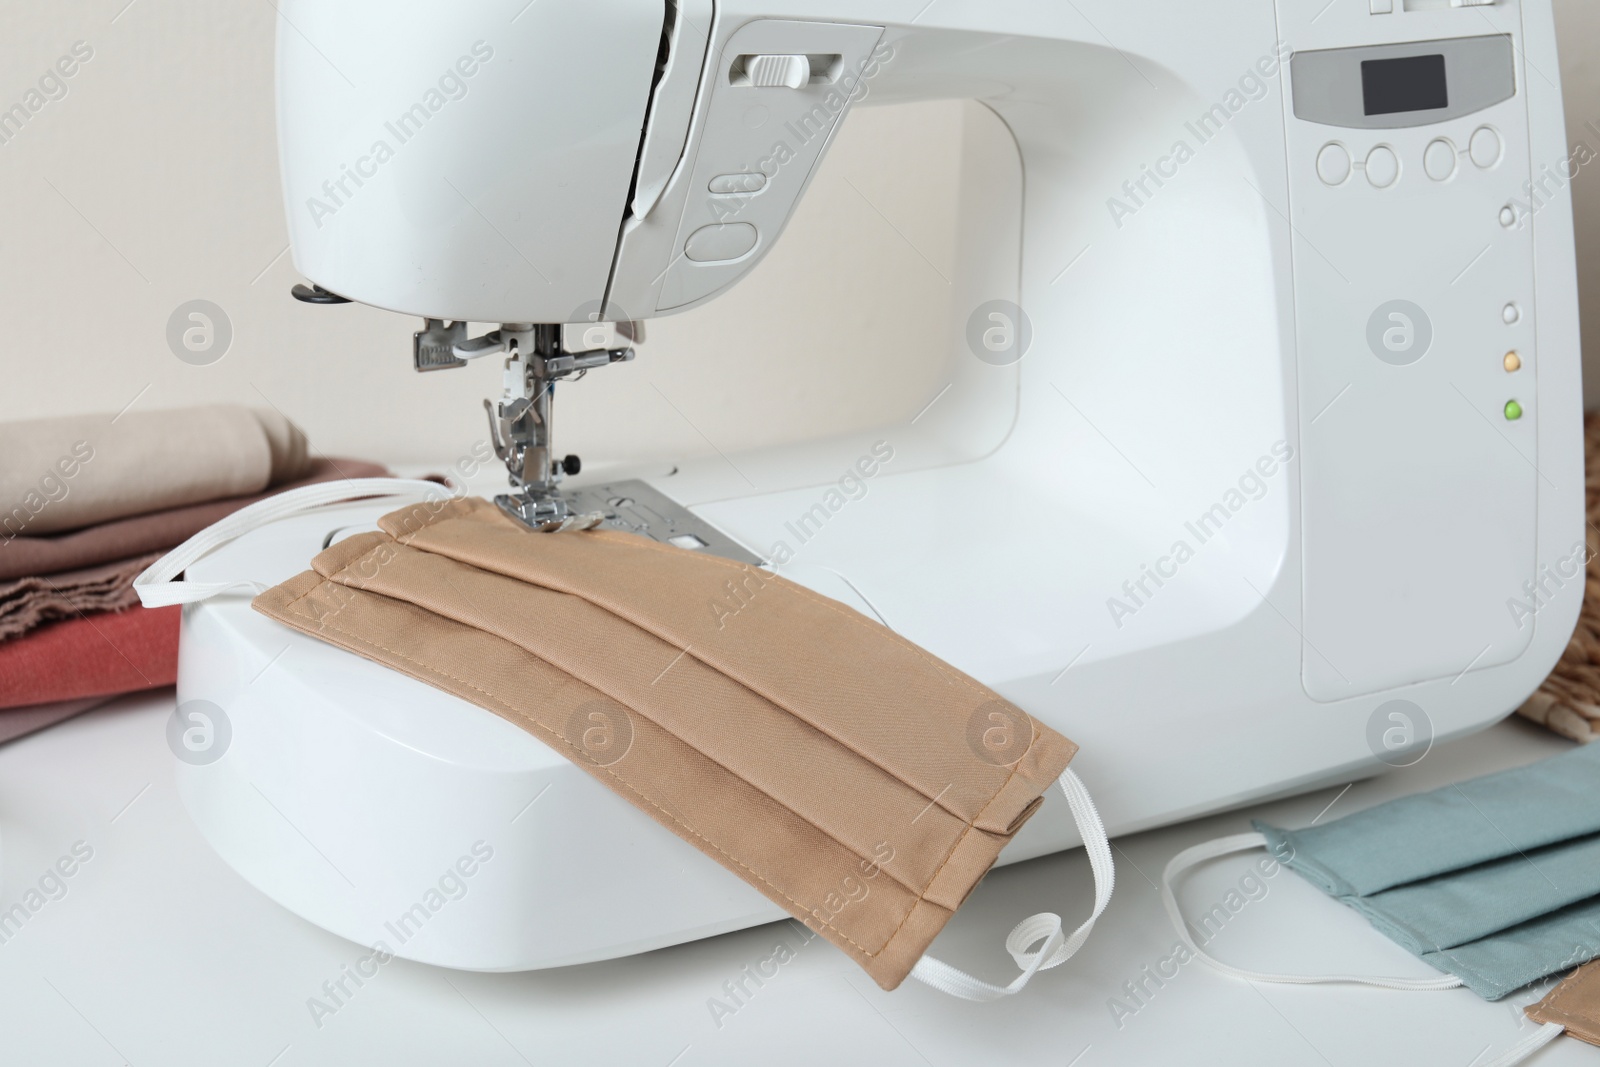 Photo of Sewing machine with homemade protective mask on white table